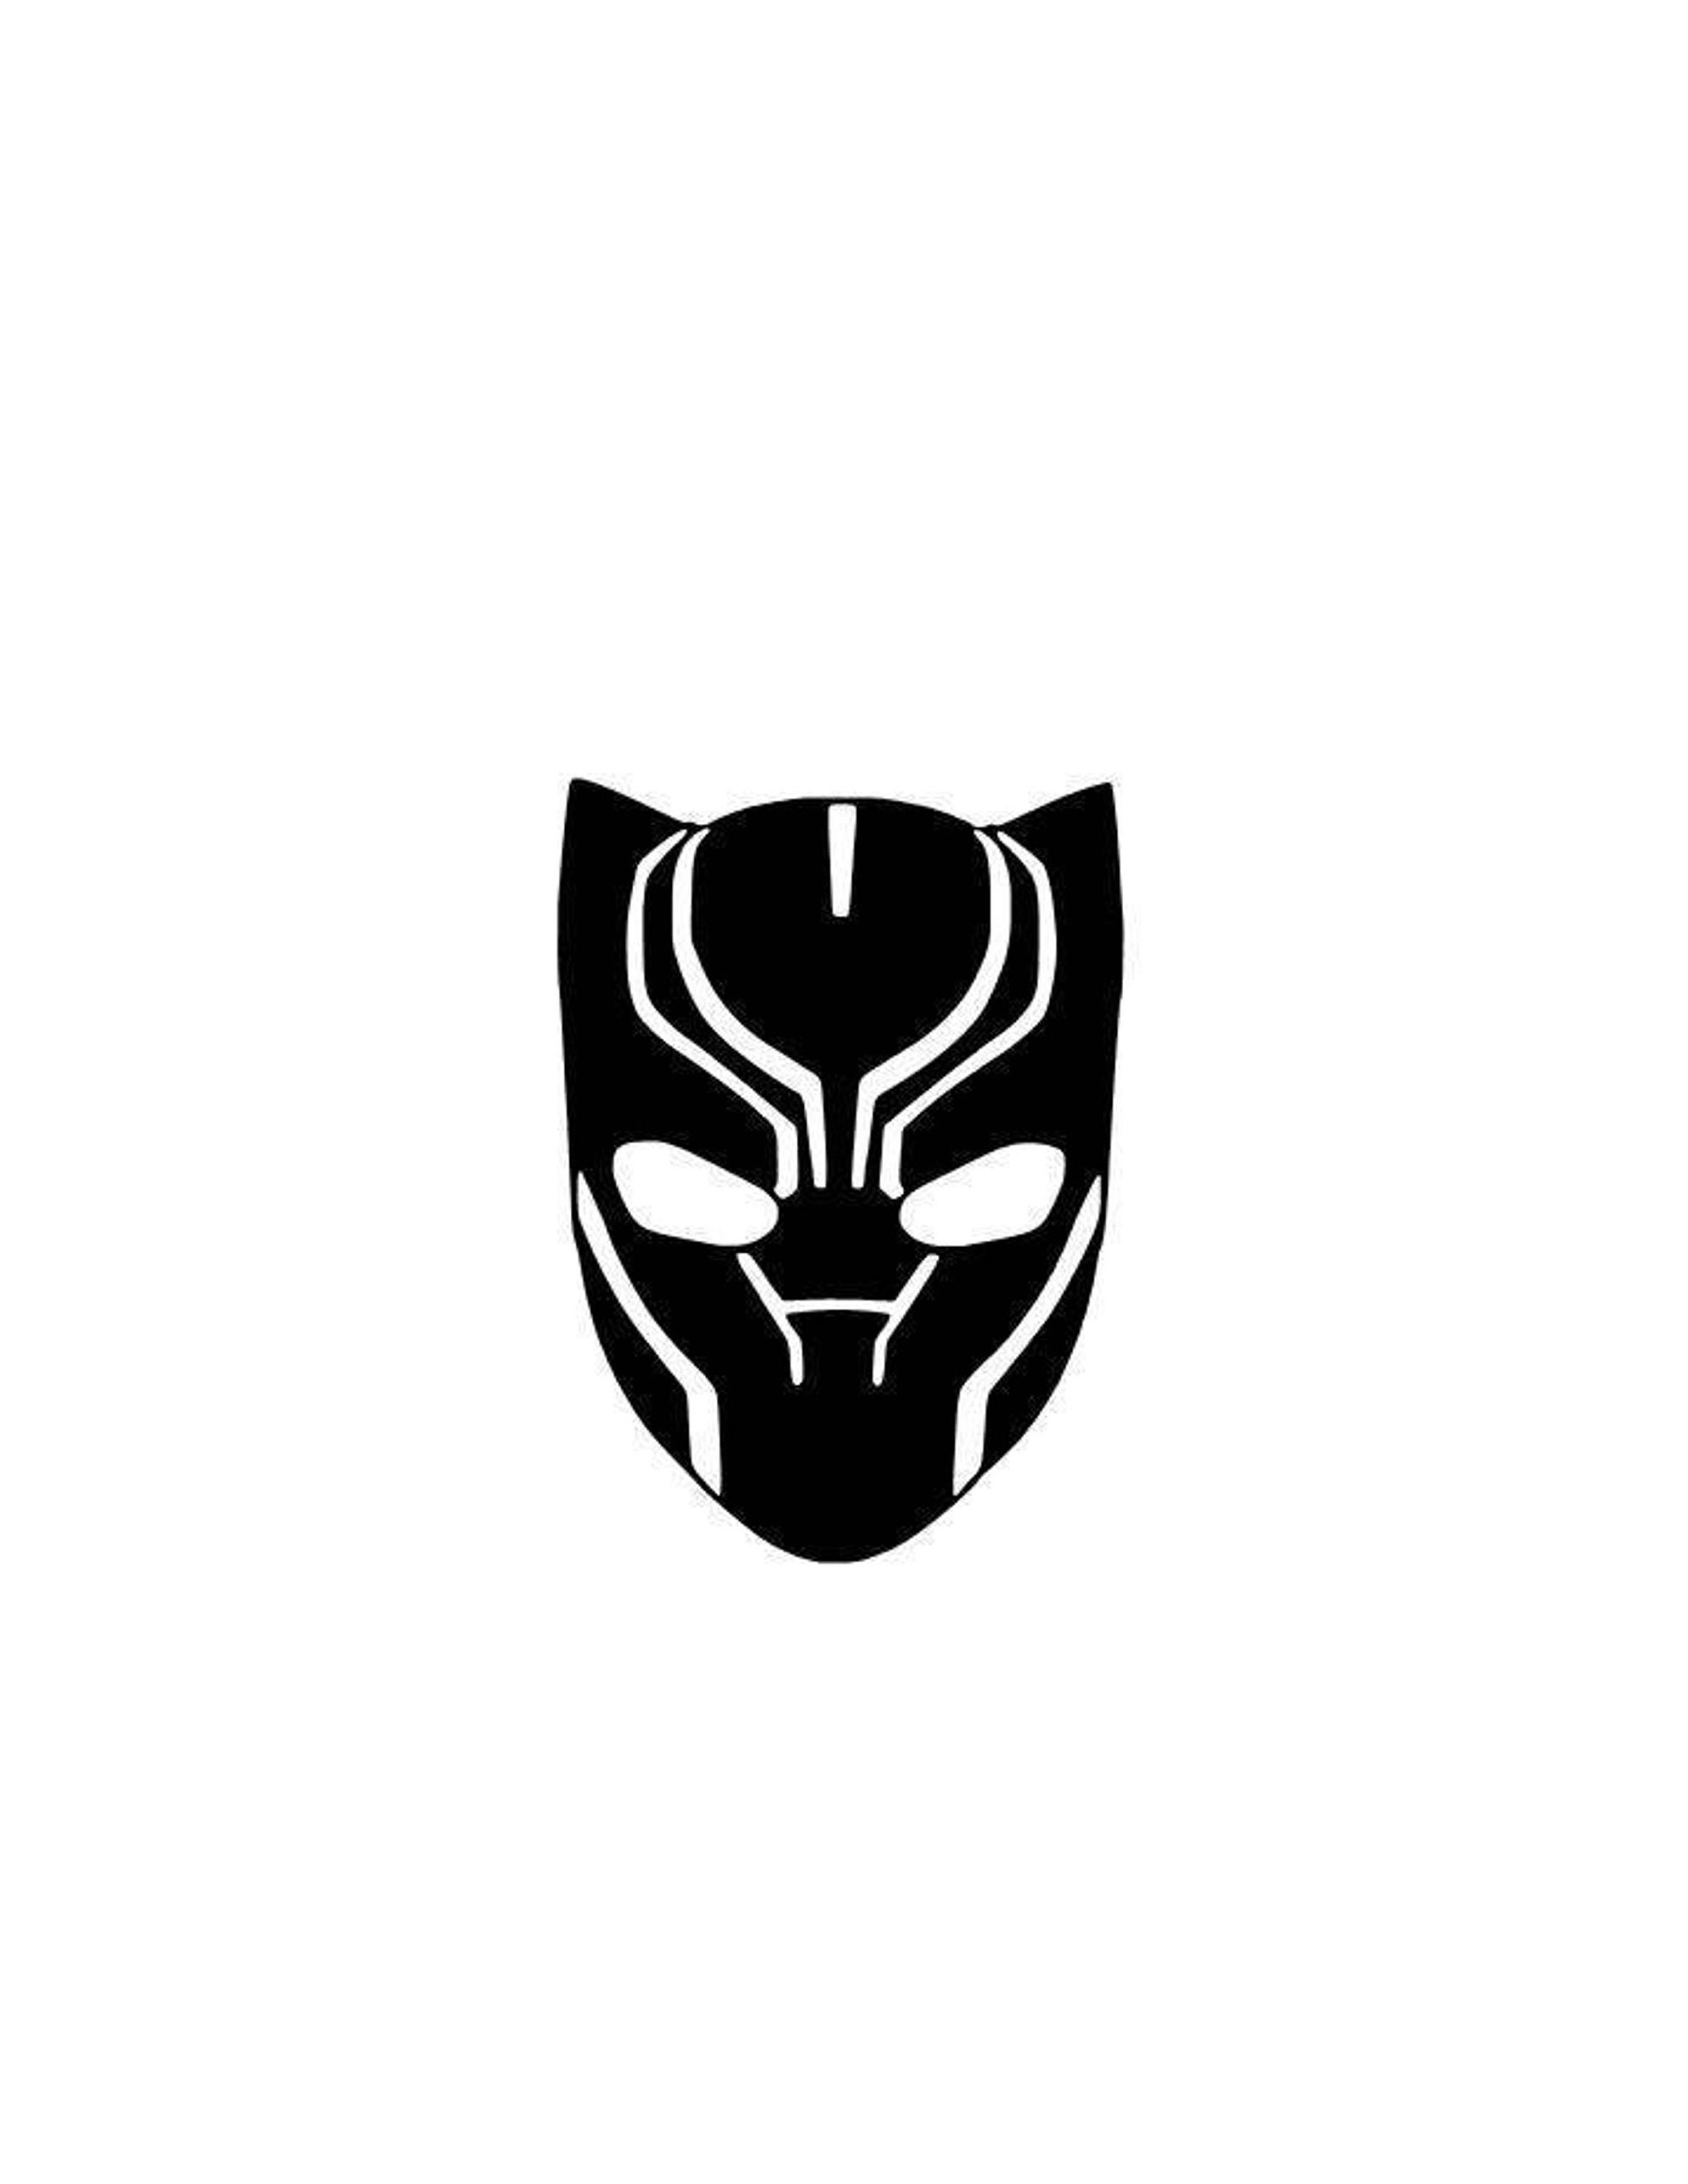 Black Panther Vinyl Decal Sticker Car Window Laptop Cell Phone Etsy